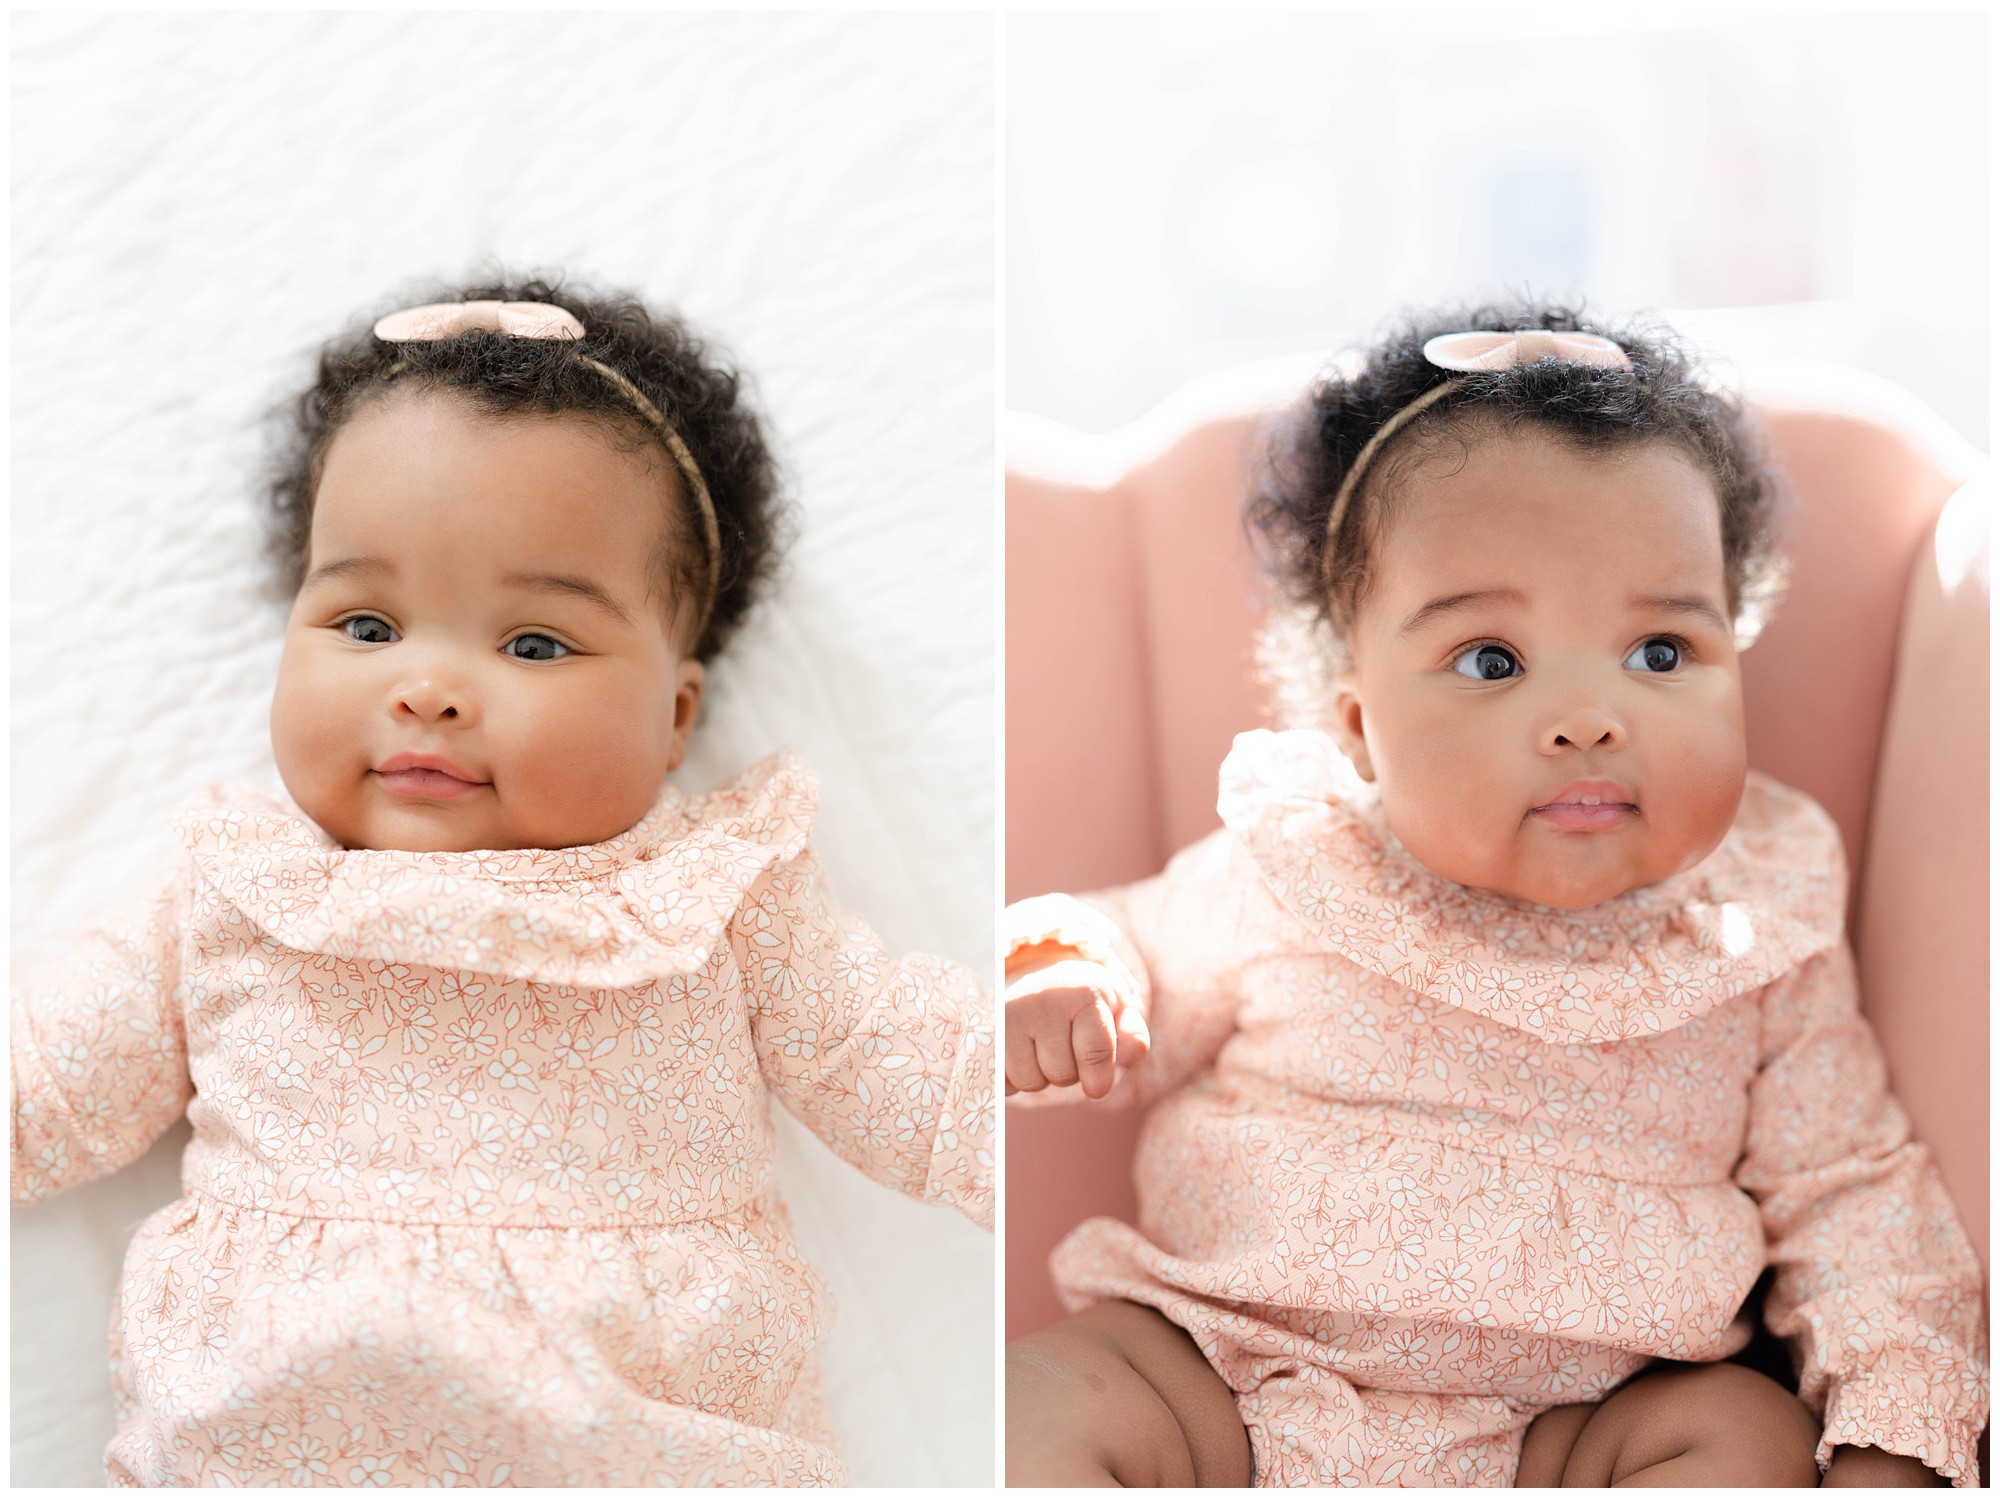 Milestone photos of a 6 month old baby by Alpharetta Newborn photographer Grace Emily Photography